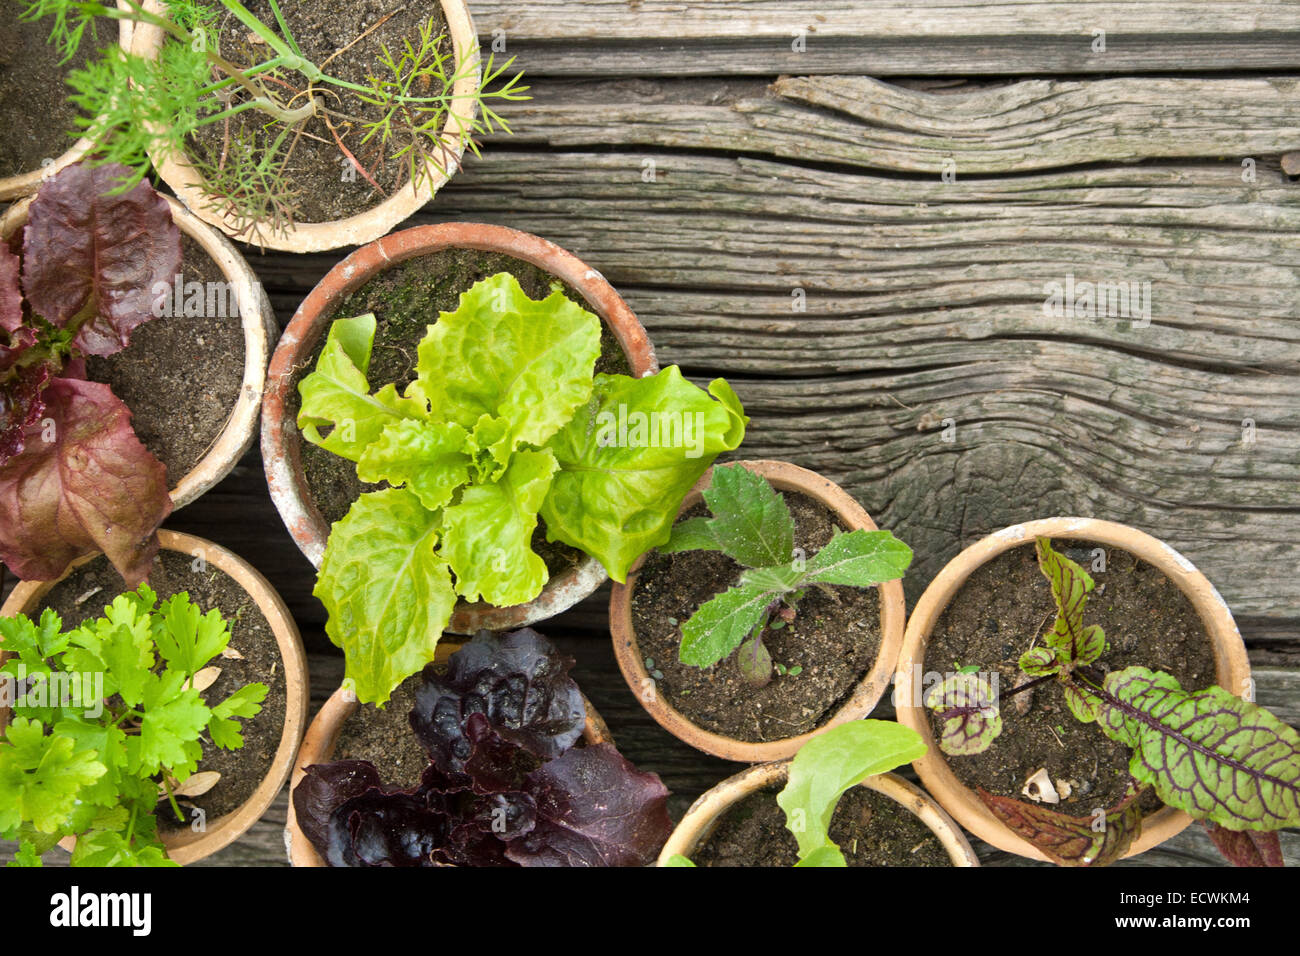 Pots with herbs and  salad plants Stock Photo